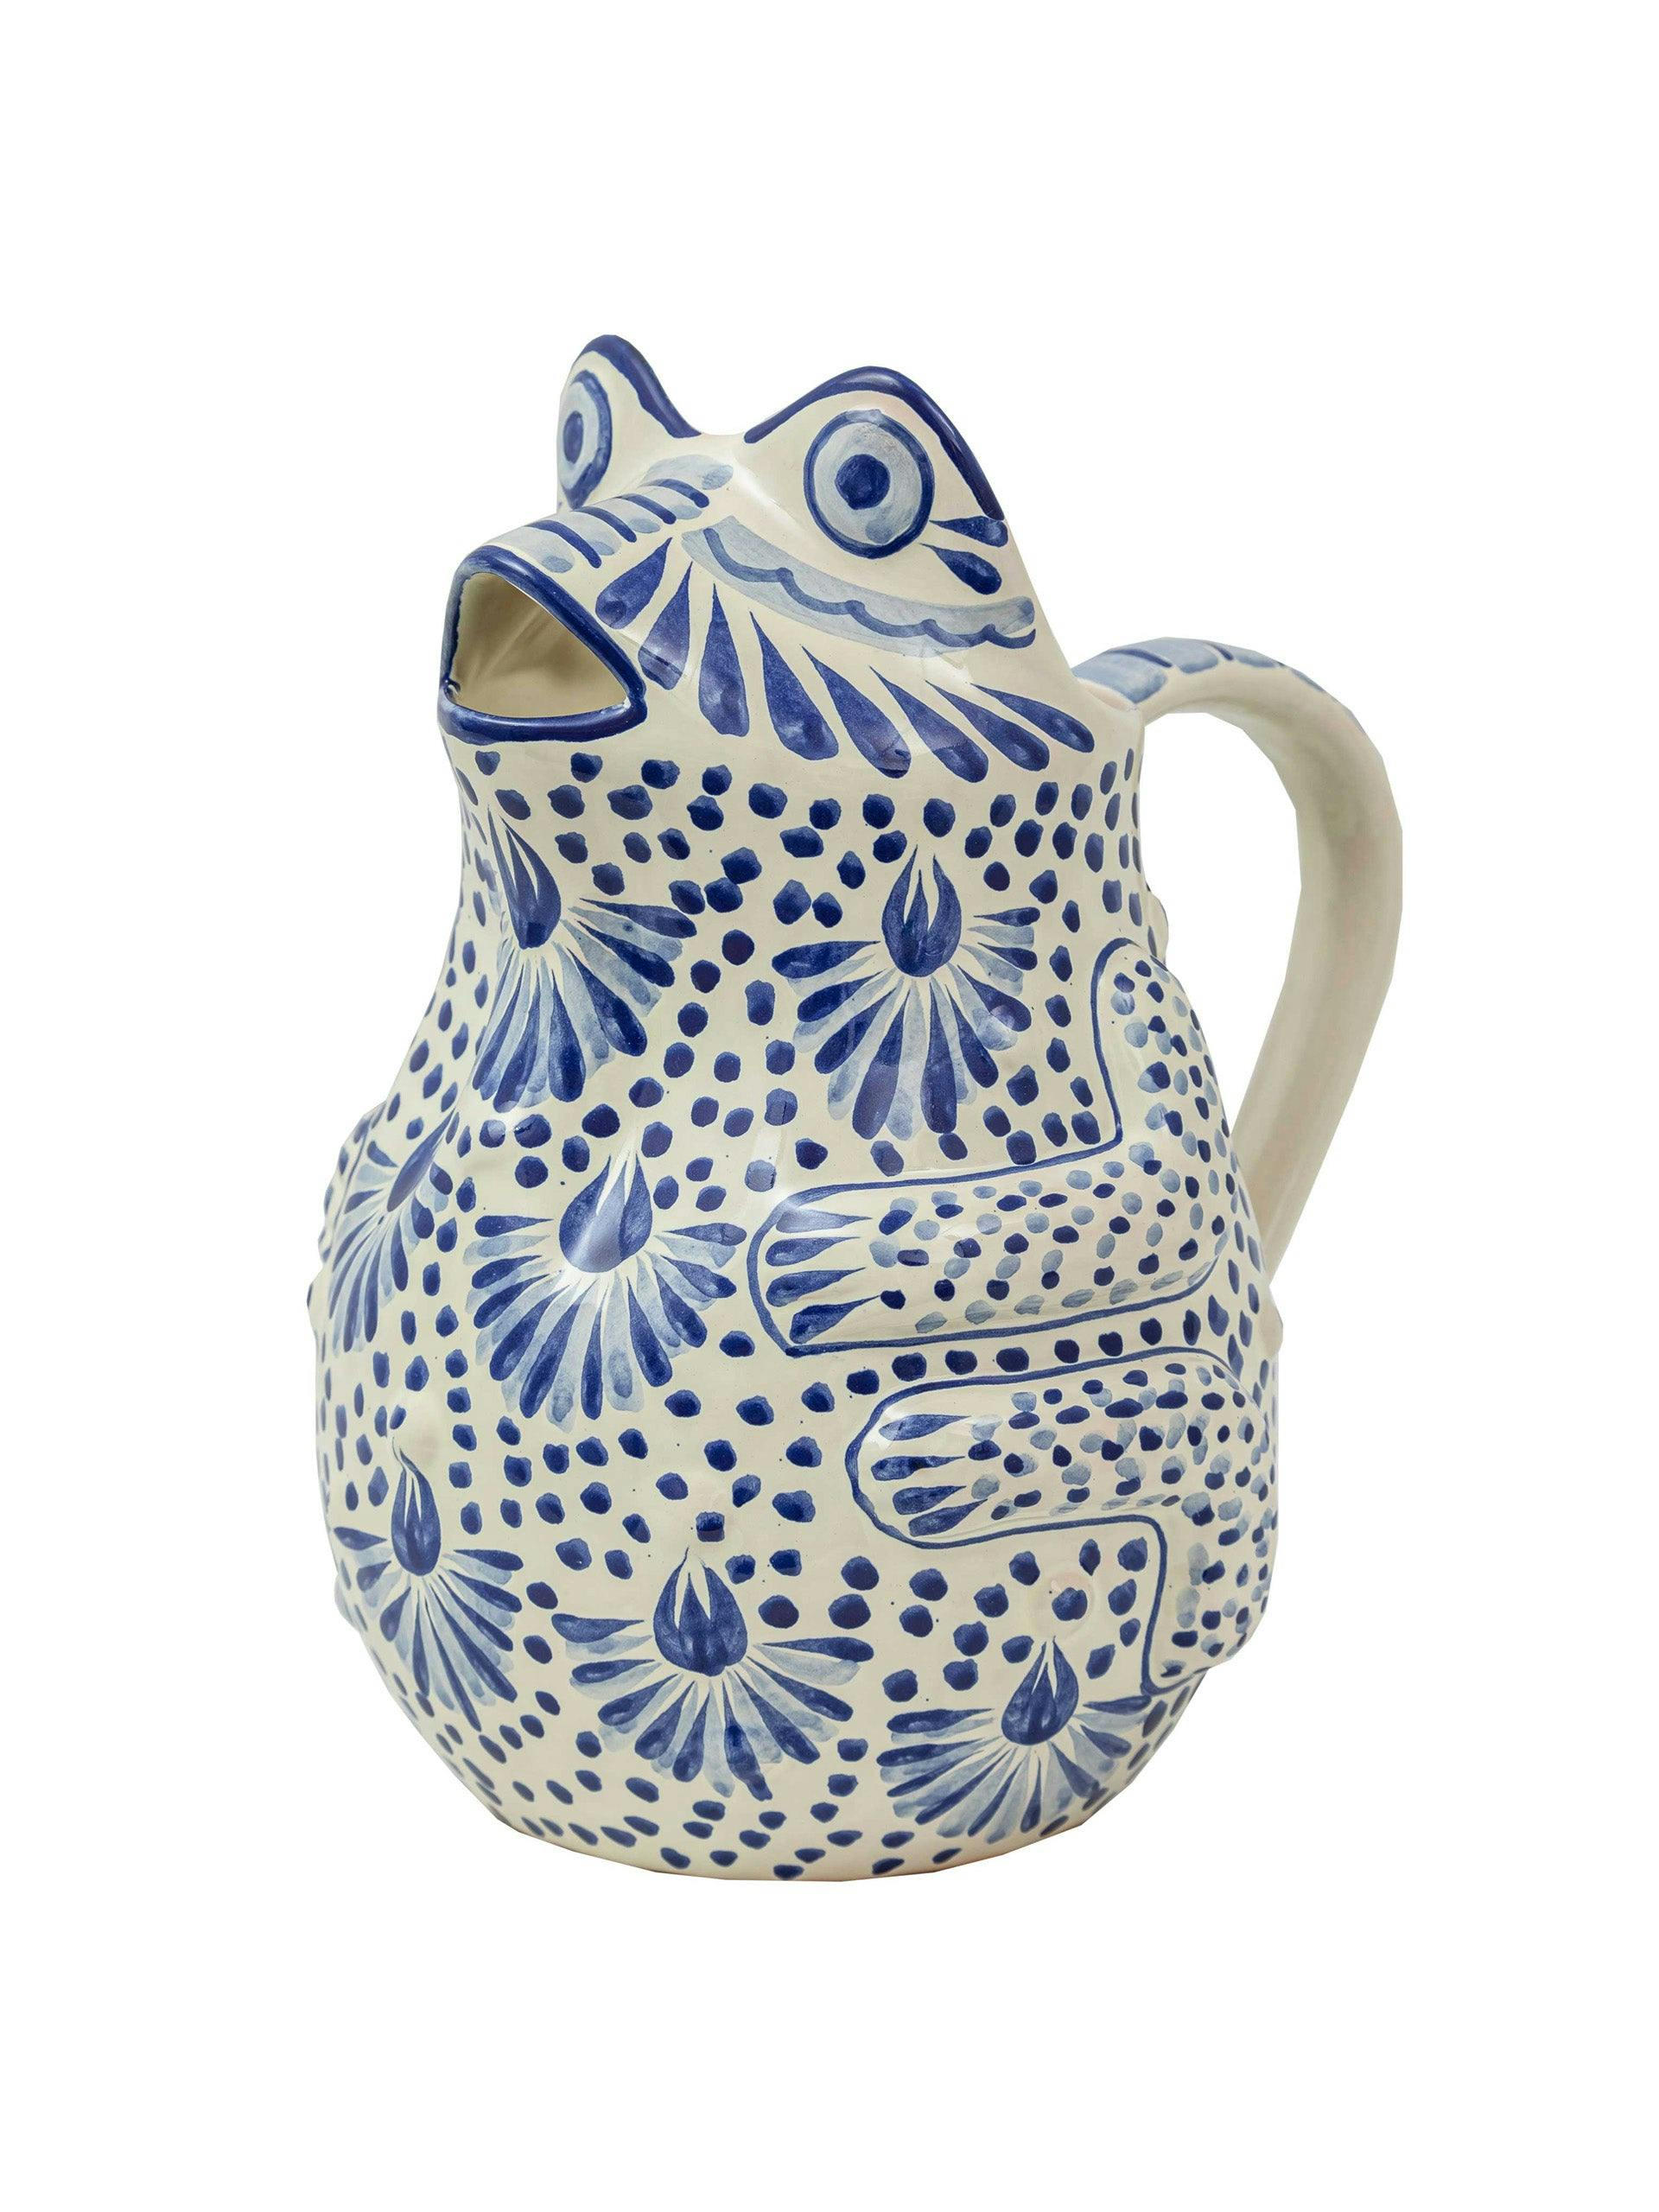 Frog water pitcher in blue and white